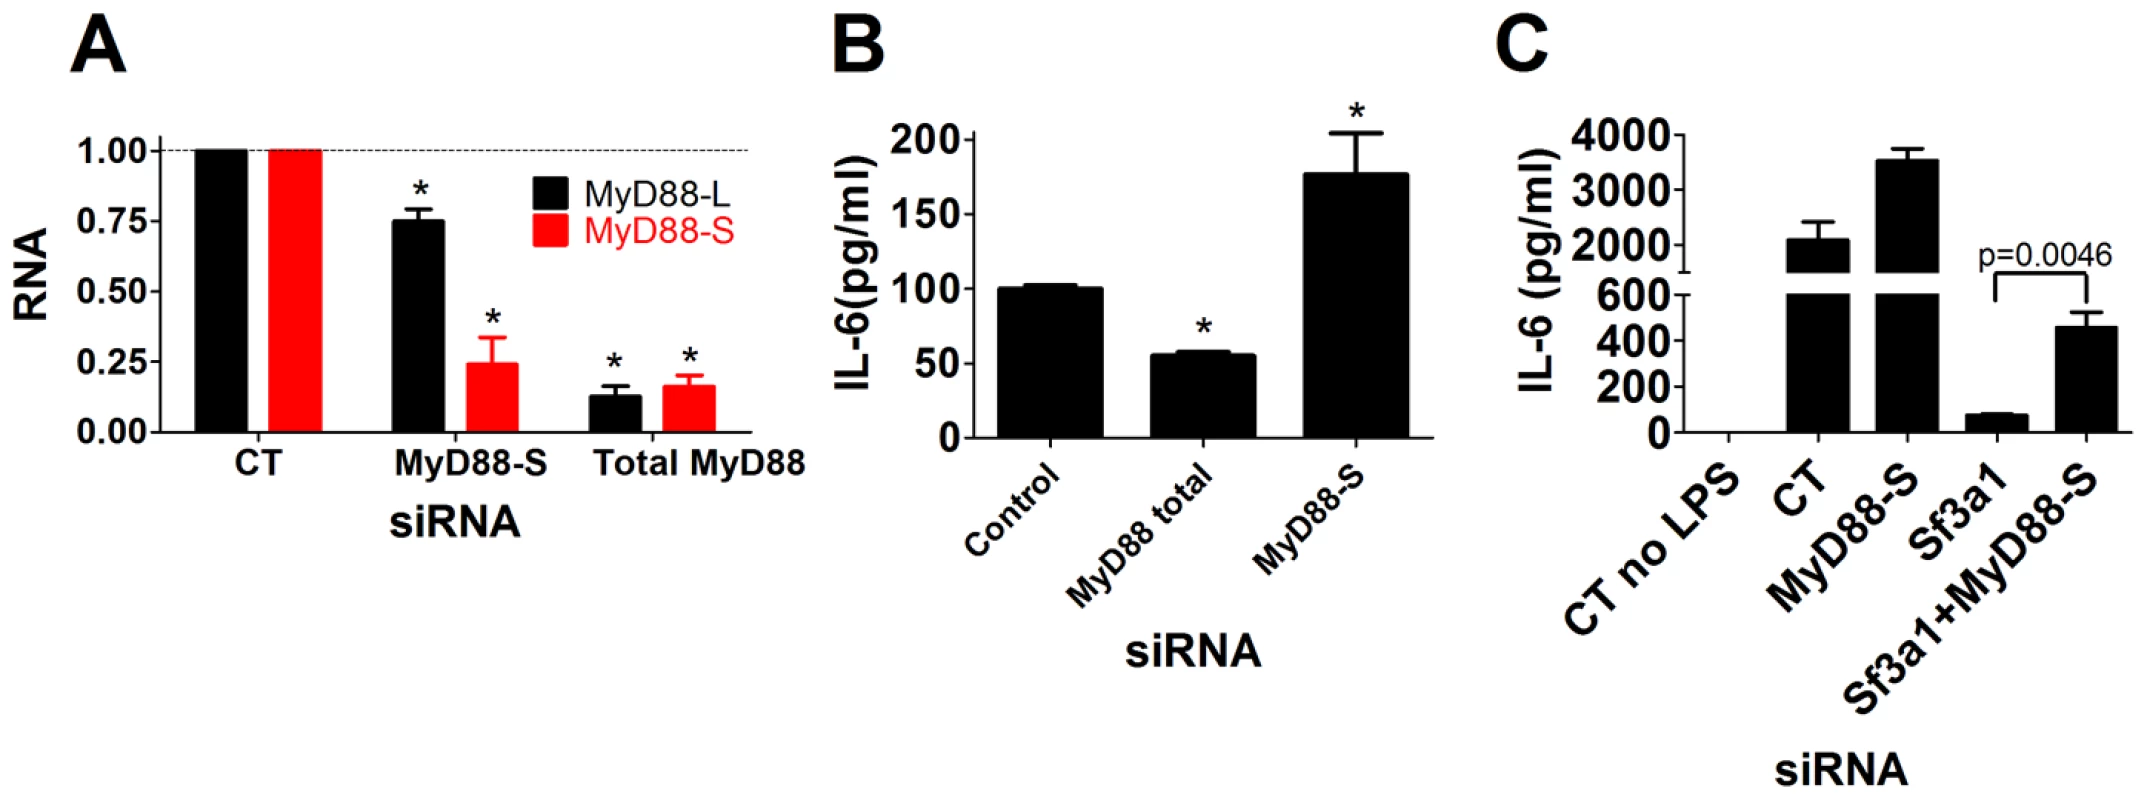 Specific inhibition of MyD88<sub>S</sub> enhances LPS-induced cytokine production and partially rescues the innate immune defect caused by SF3A1 RNAi.